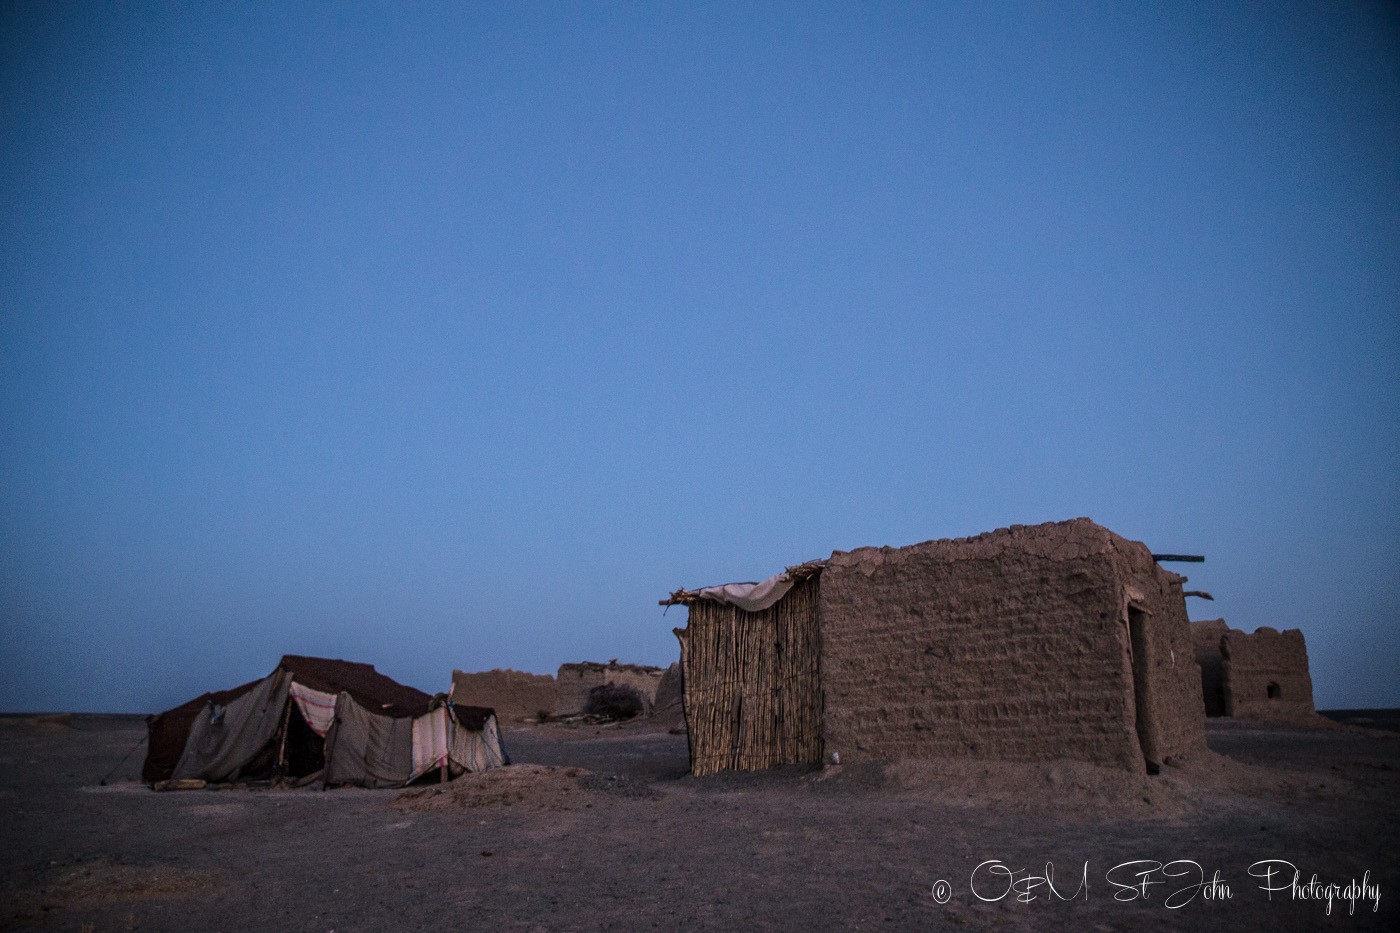 Nomad hut in Erg Chebbi, our accommodation for the night in the Sahara Desert. Morocco